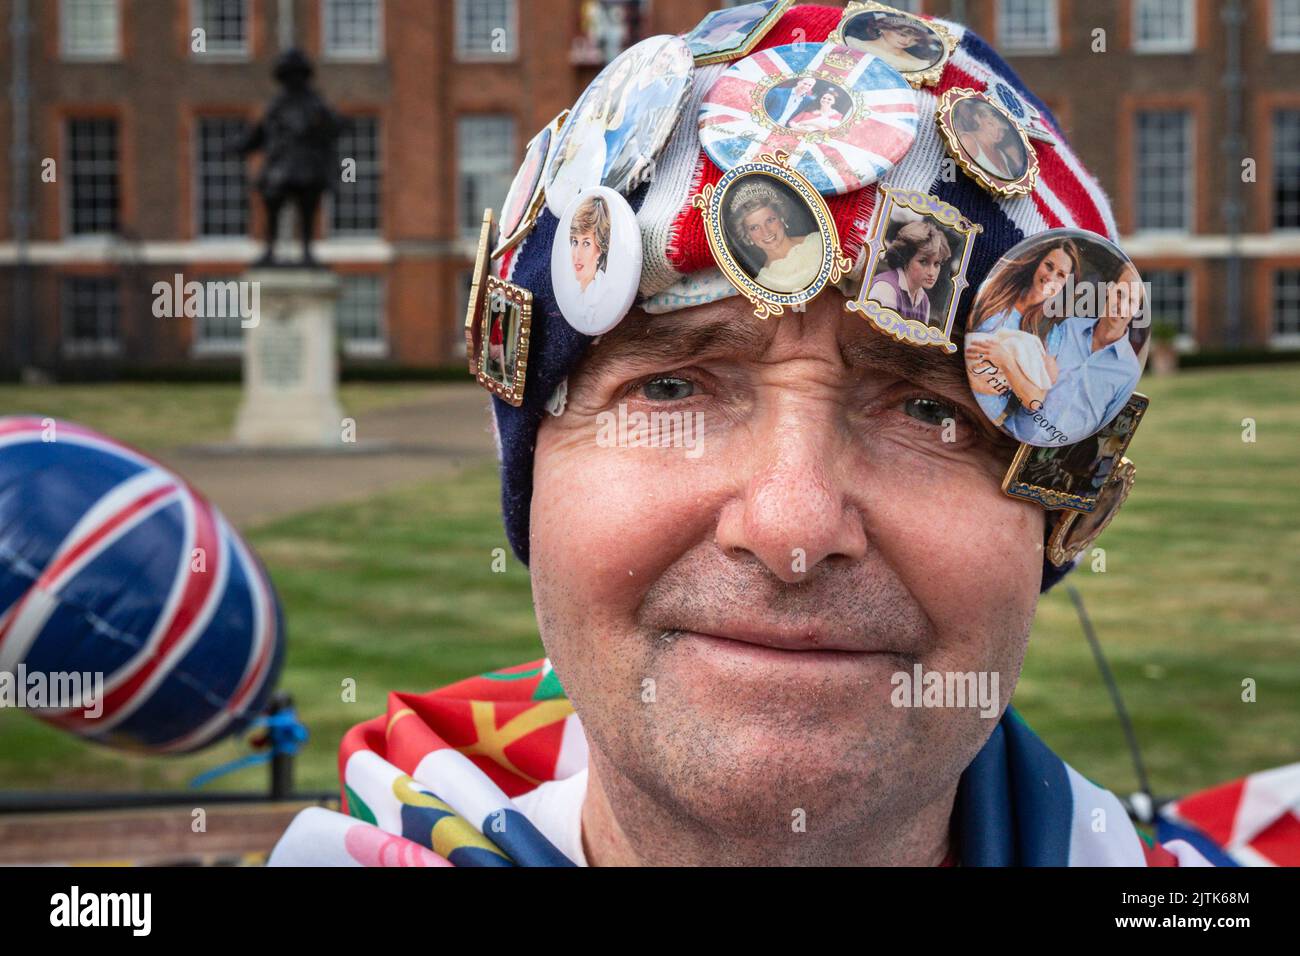 London, UK. 31st Aug, 2022. Royal Superfan John at the gates. Royal fans and visitors gather at the gates to Kensington Palace to commemorate the 25th anniversary of th tragic death of Diana Princess of Wales. Credit: Imageplotter/Alamy Live News Stock Photo